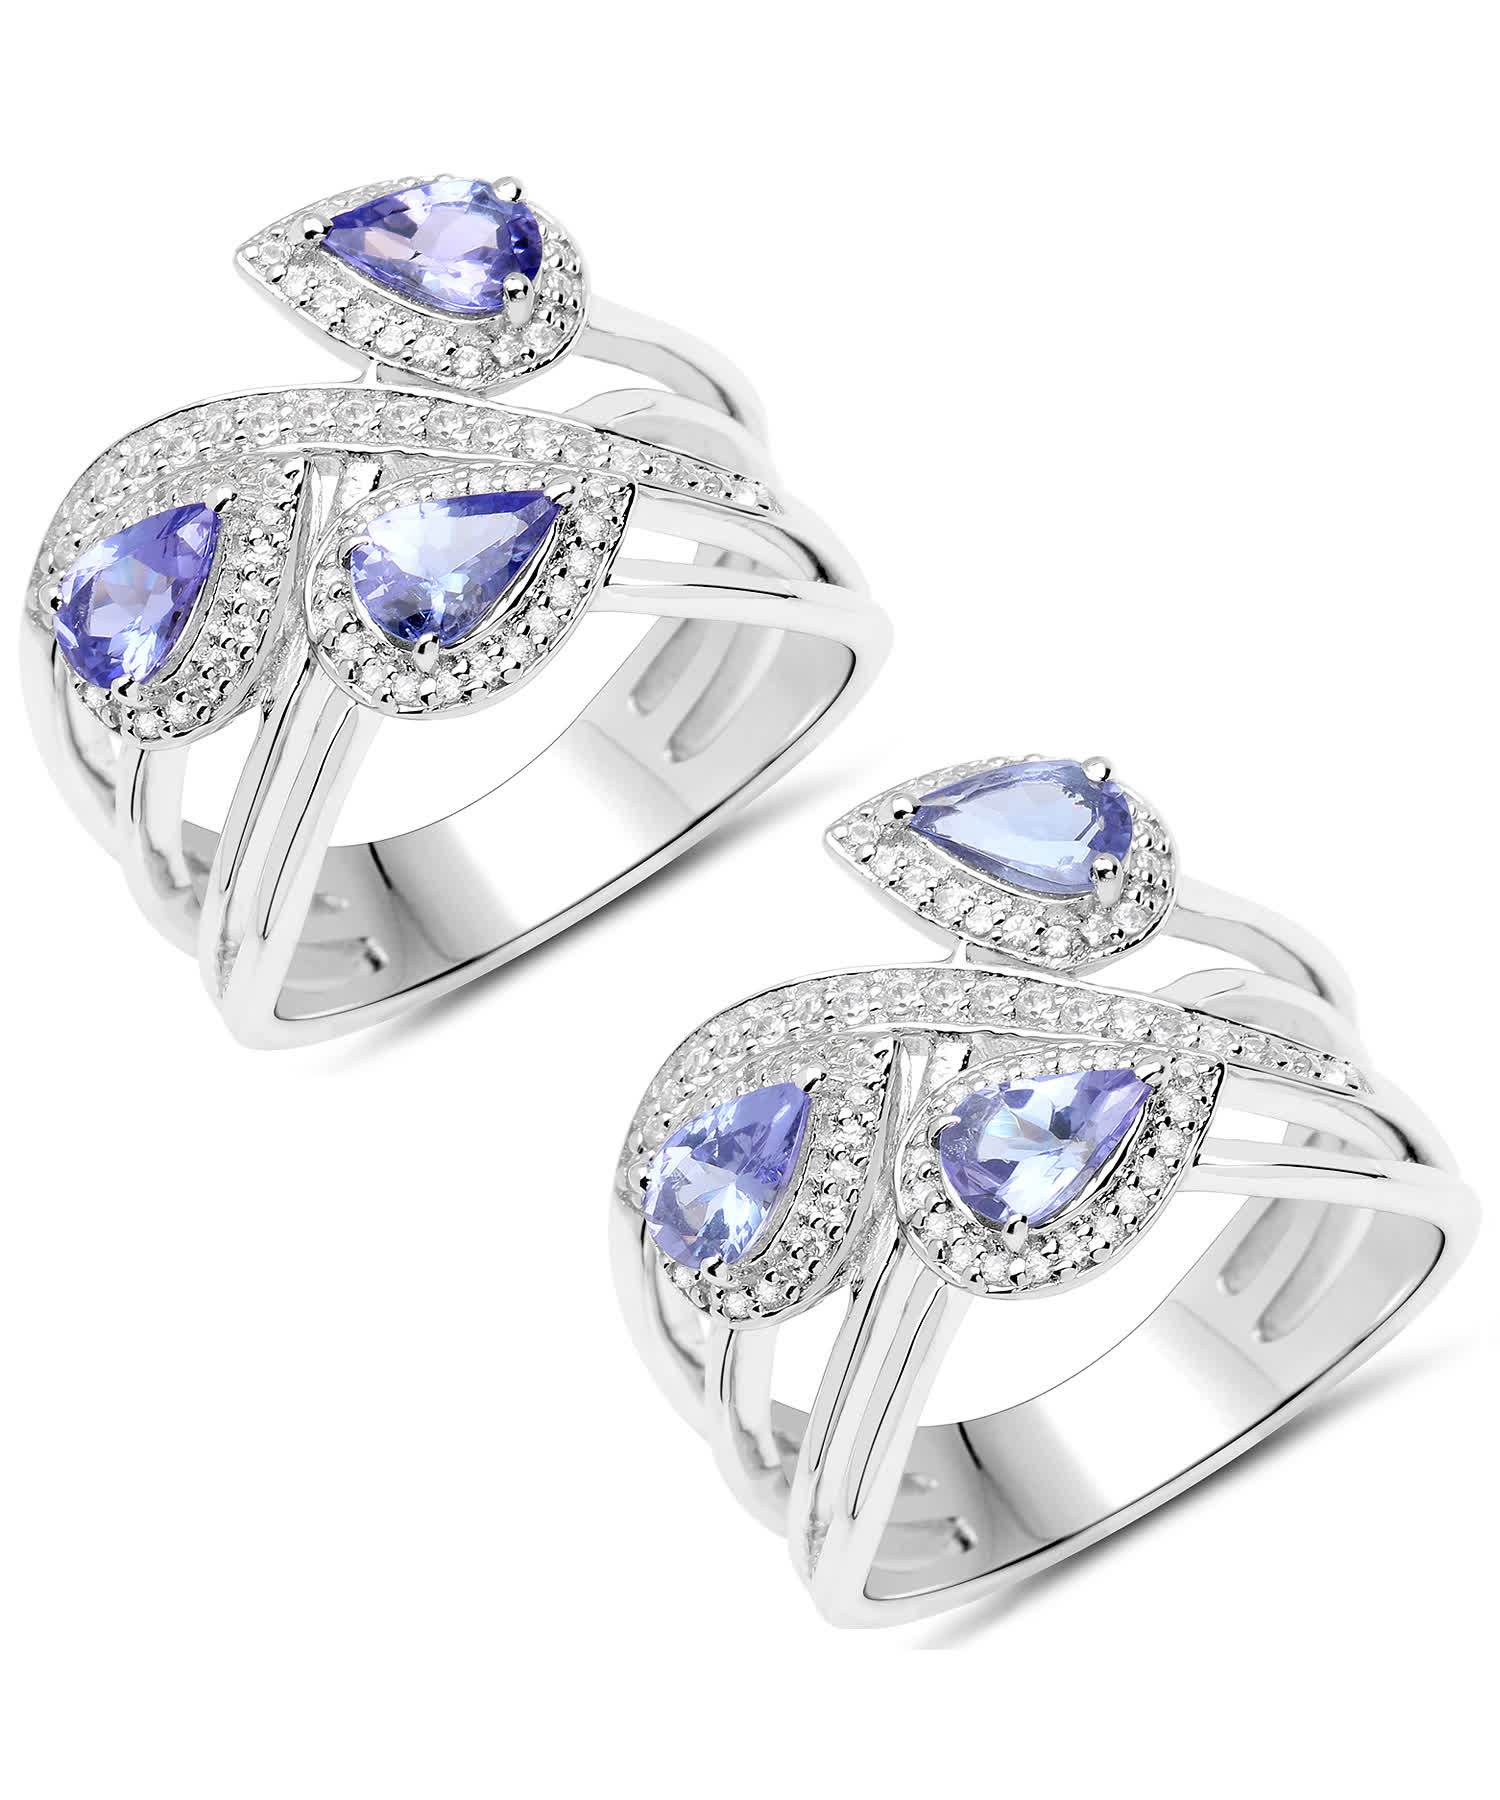 1.52ctw Natural Tanzanite and Zircon Rhodium Plated 925 Sterling Silver Cocktail Ring View 1